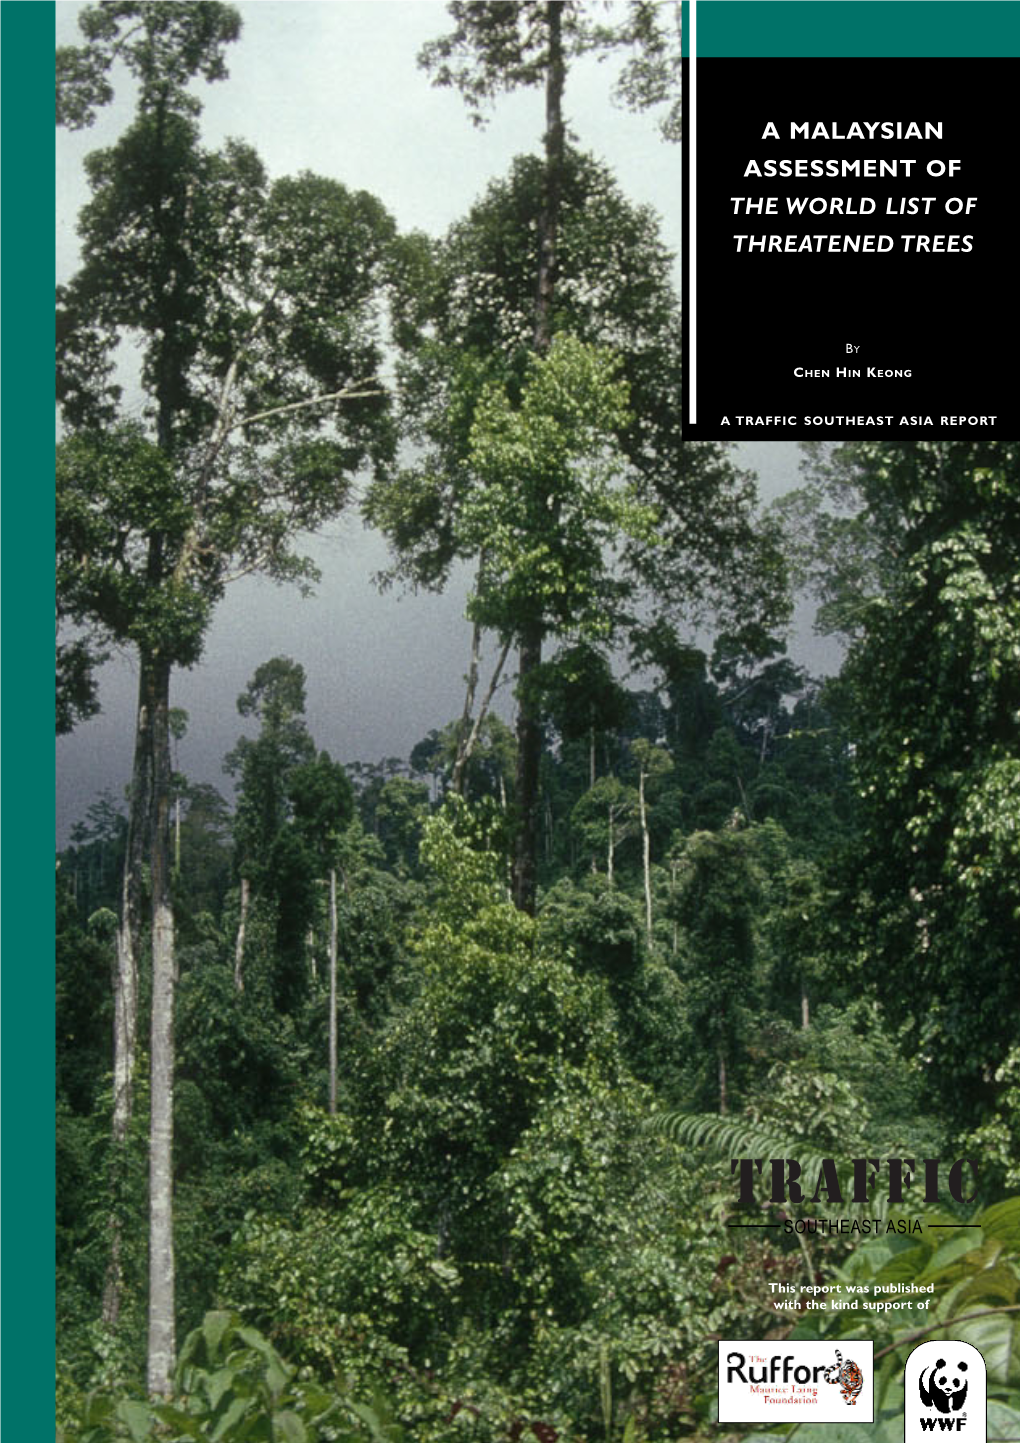 A Malaysian Assessment of the World List of Threatened Trees